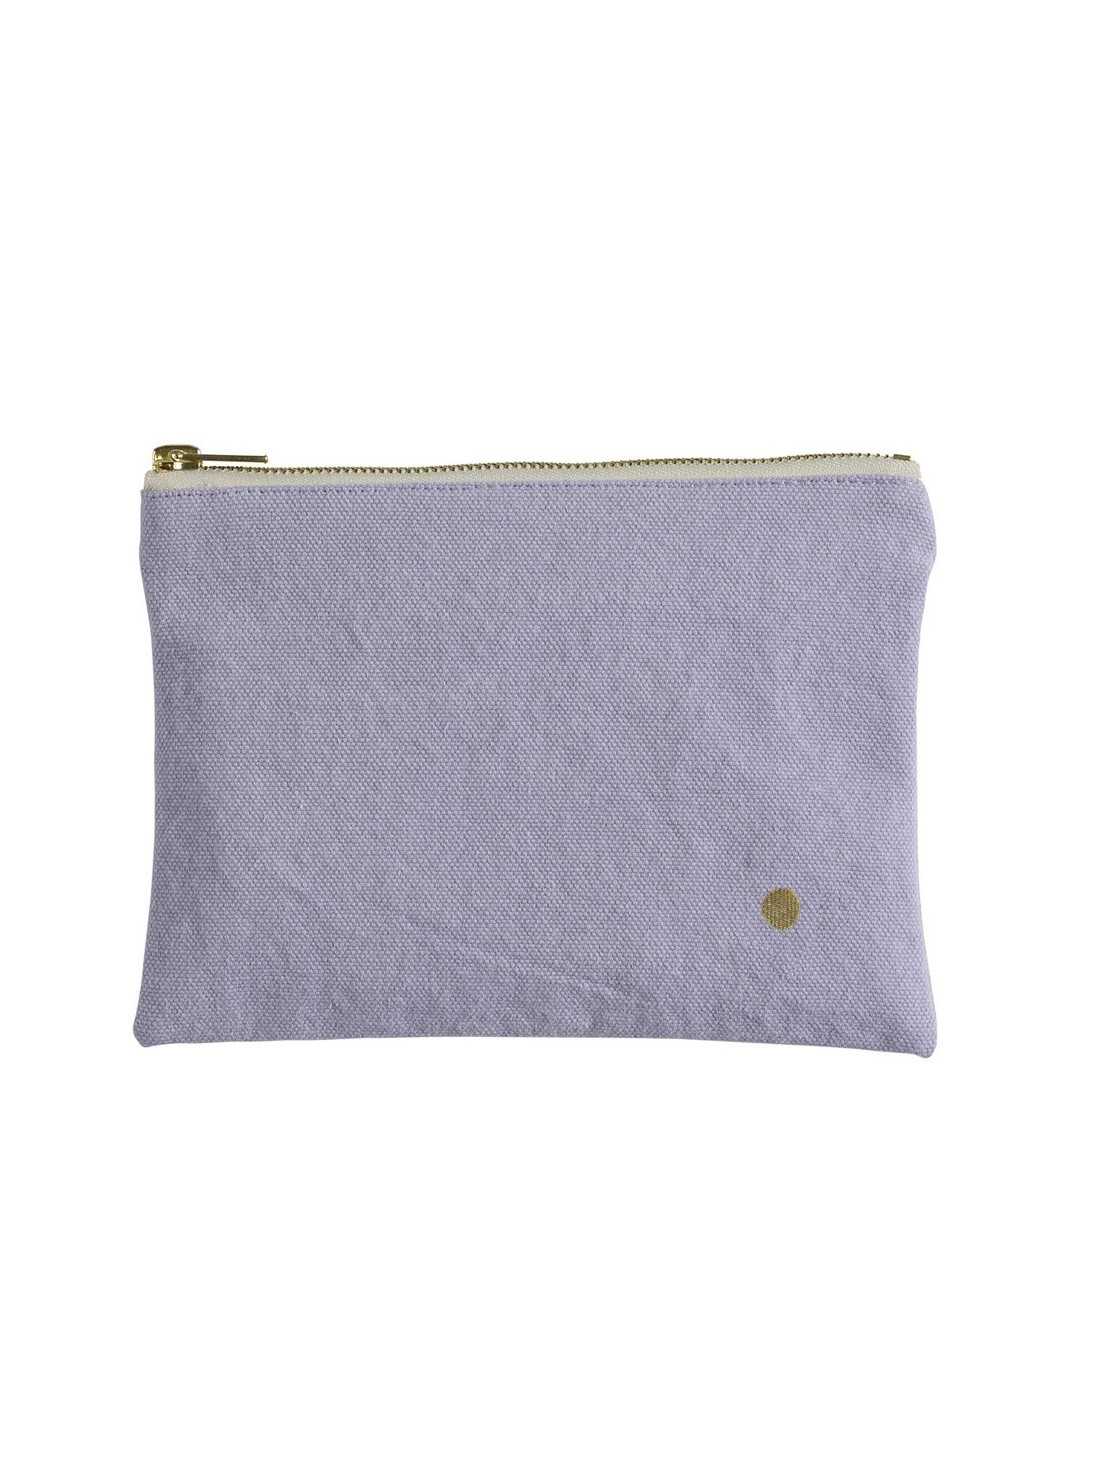 POUCH LILAS M